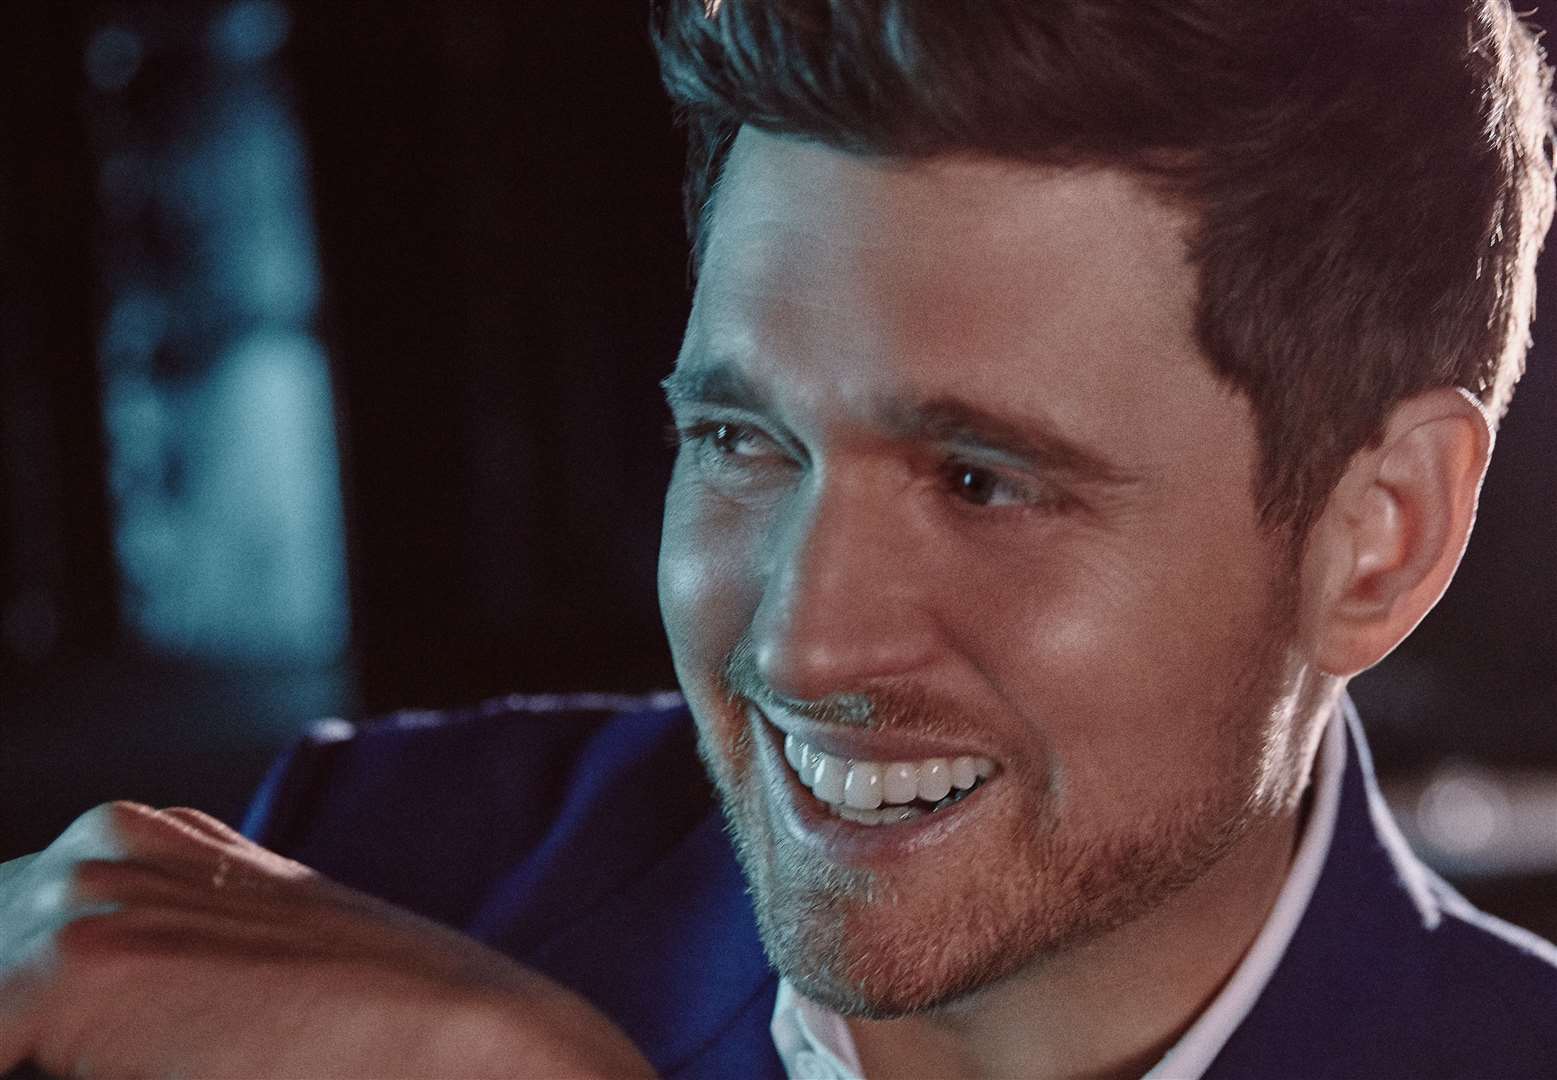 Canadian star Michael Bublé will perform in Canterbury